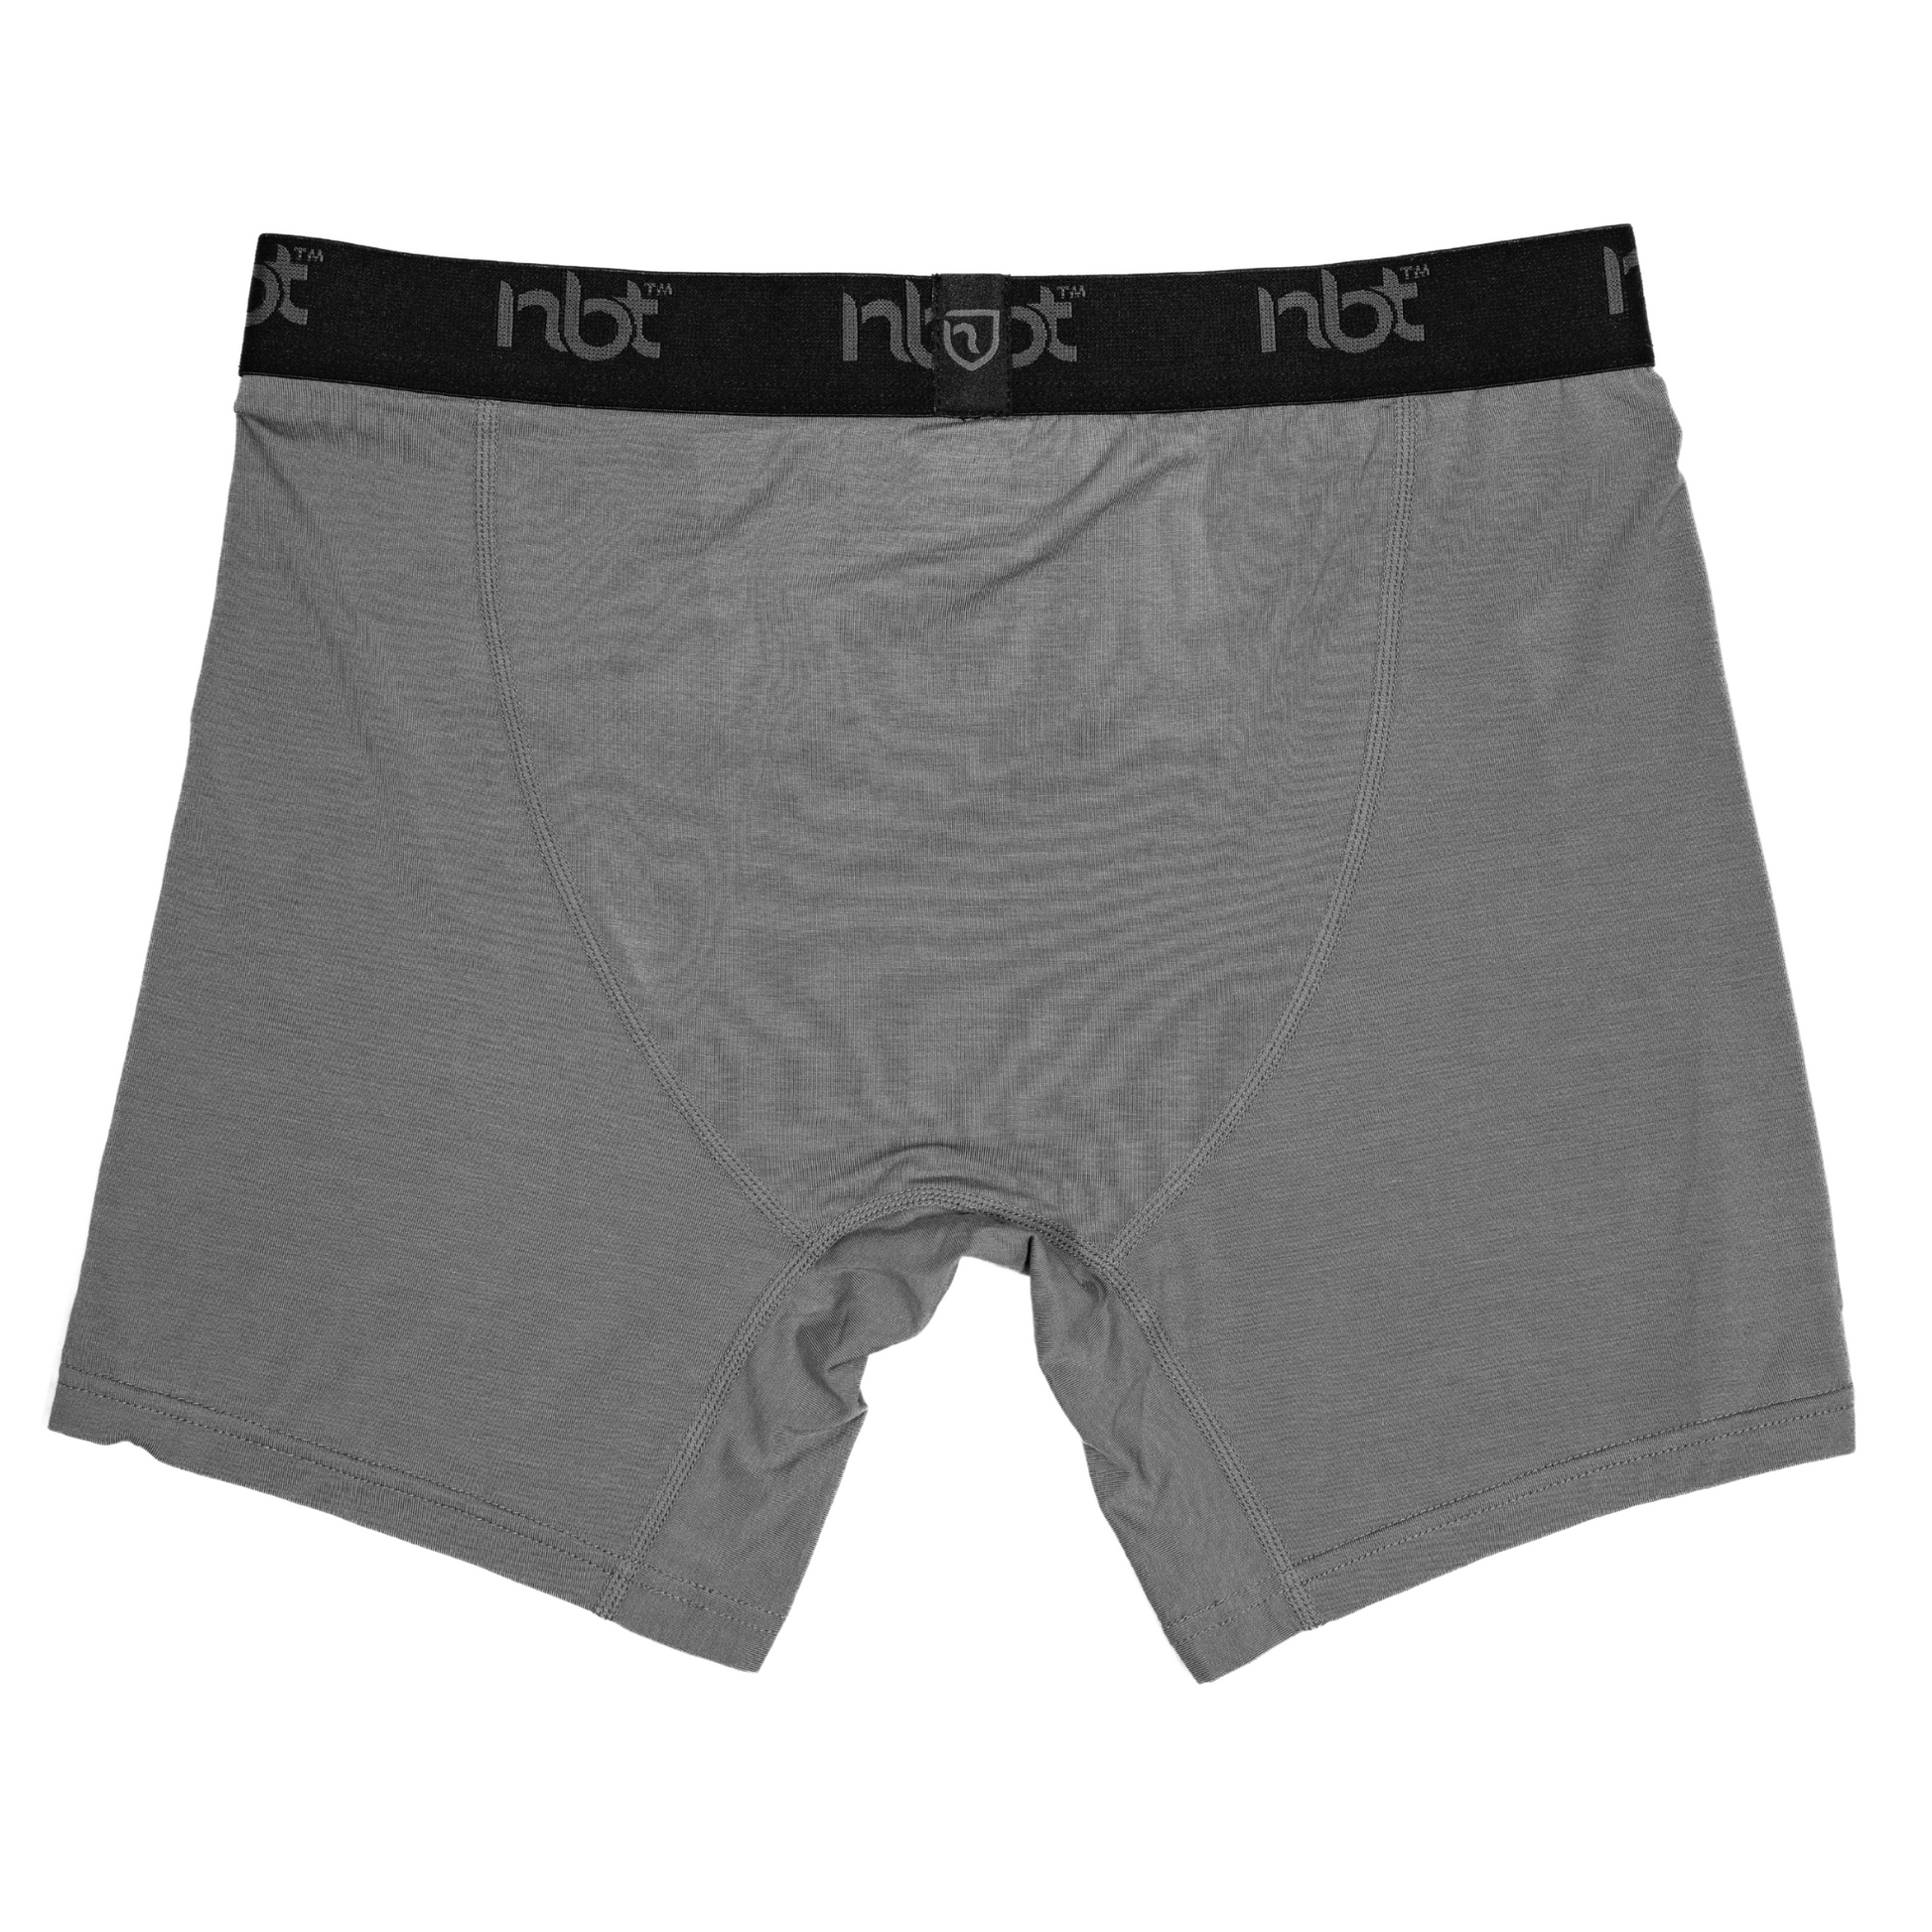 Check Out This Underwear With Pockets So You Can Stash Stuff : All Tech  Considered : NPR